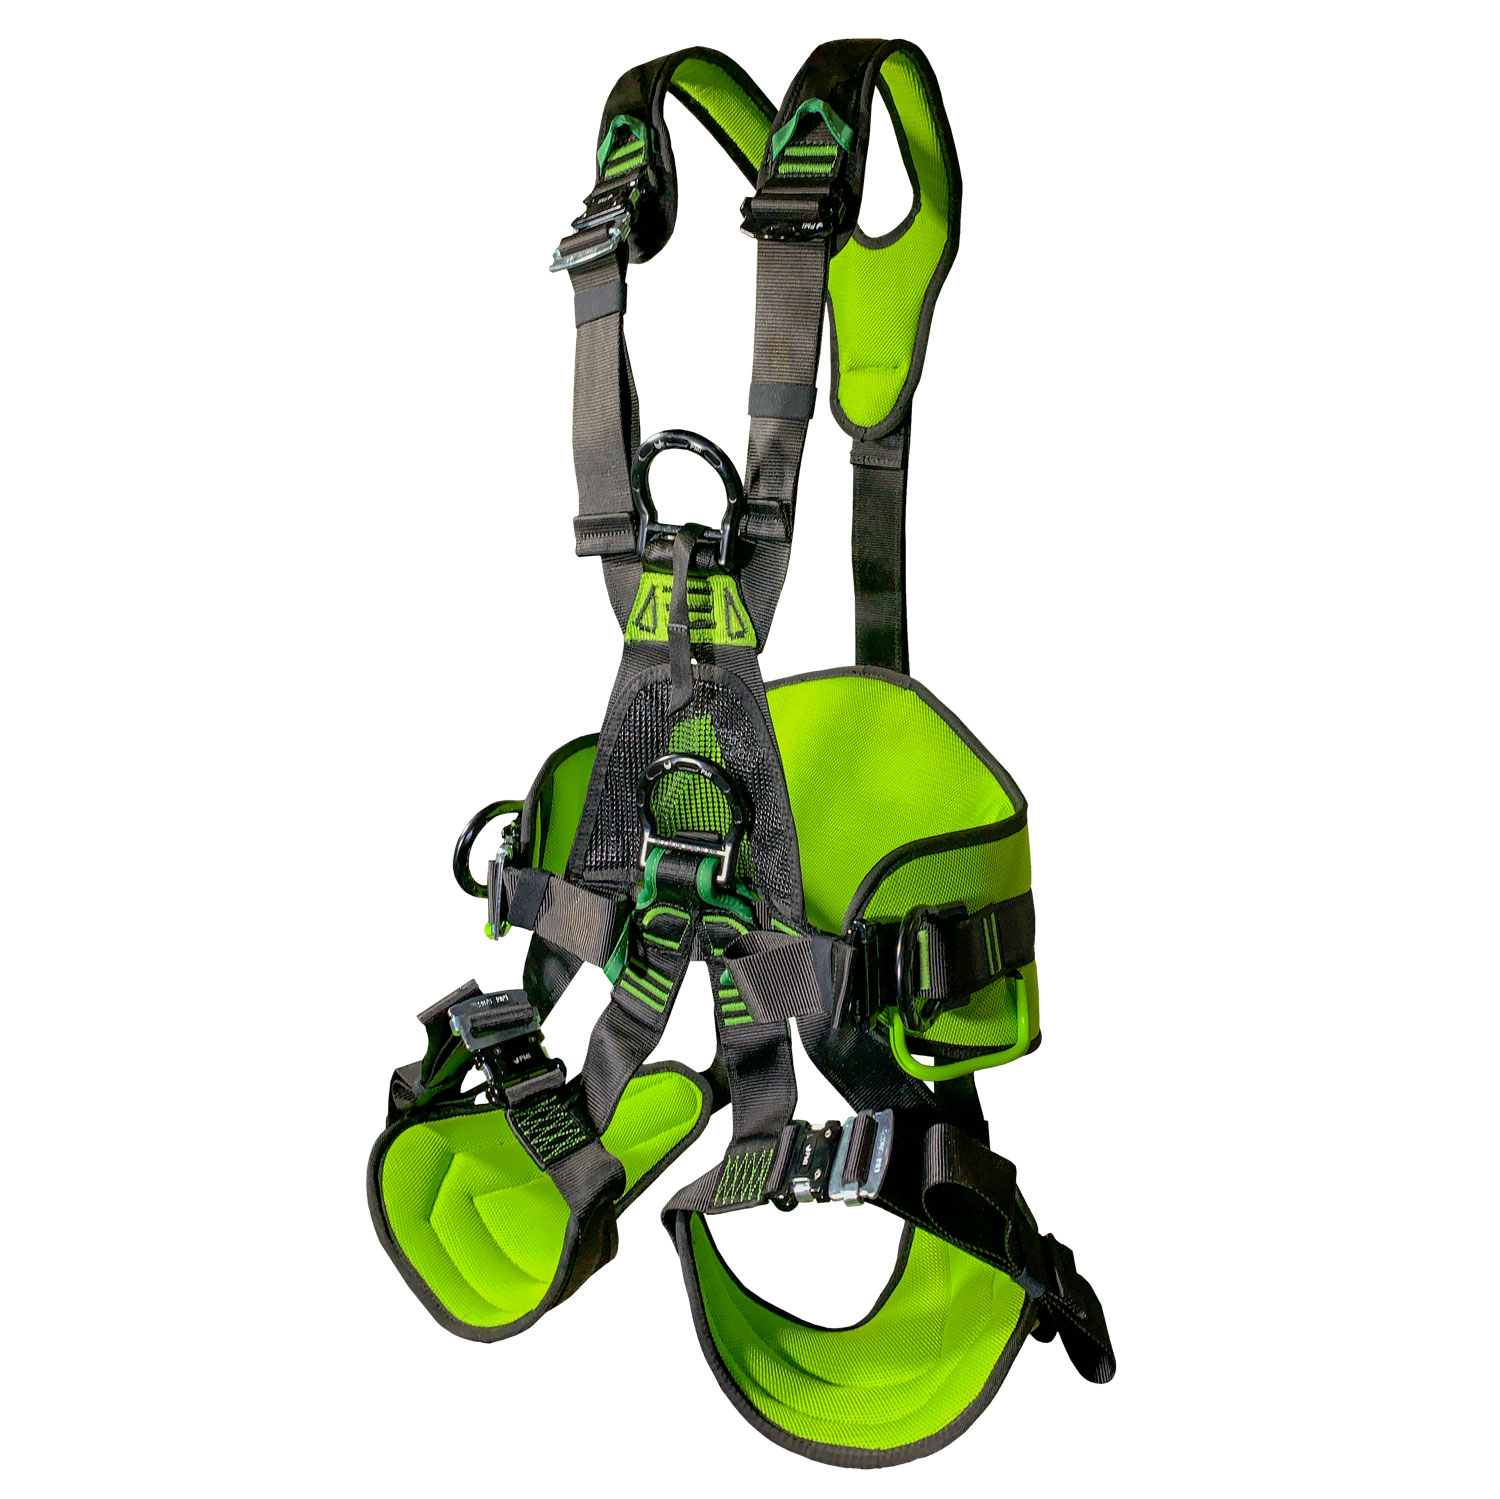 PMI Lemur Full Body Harness from Columbia Safety